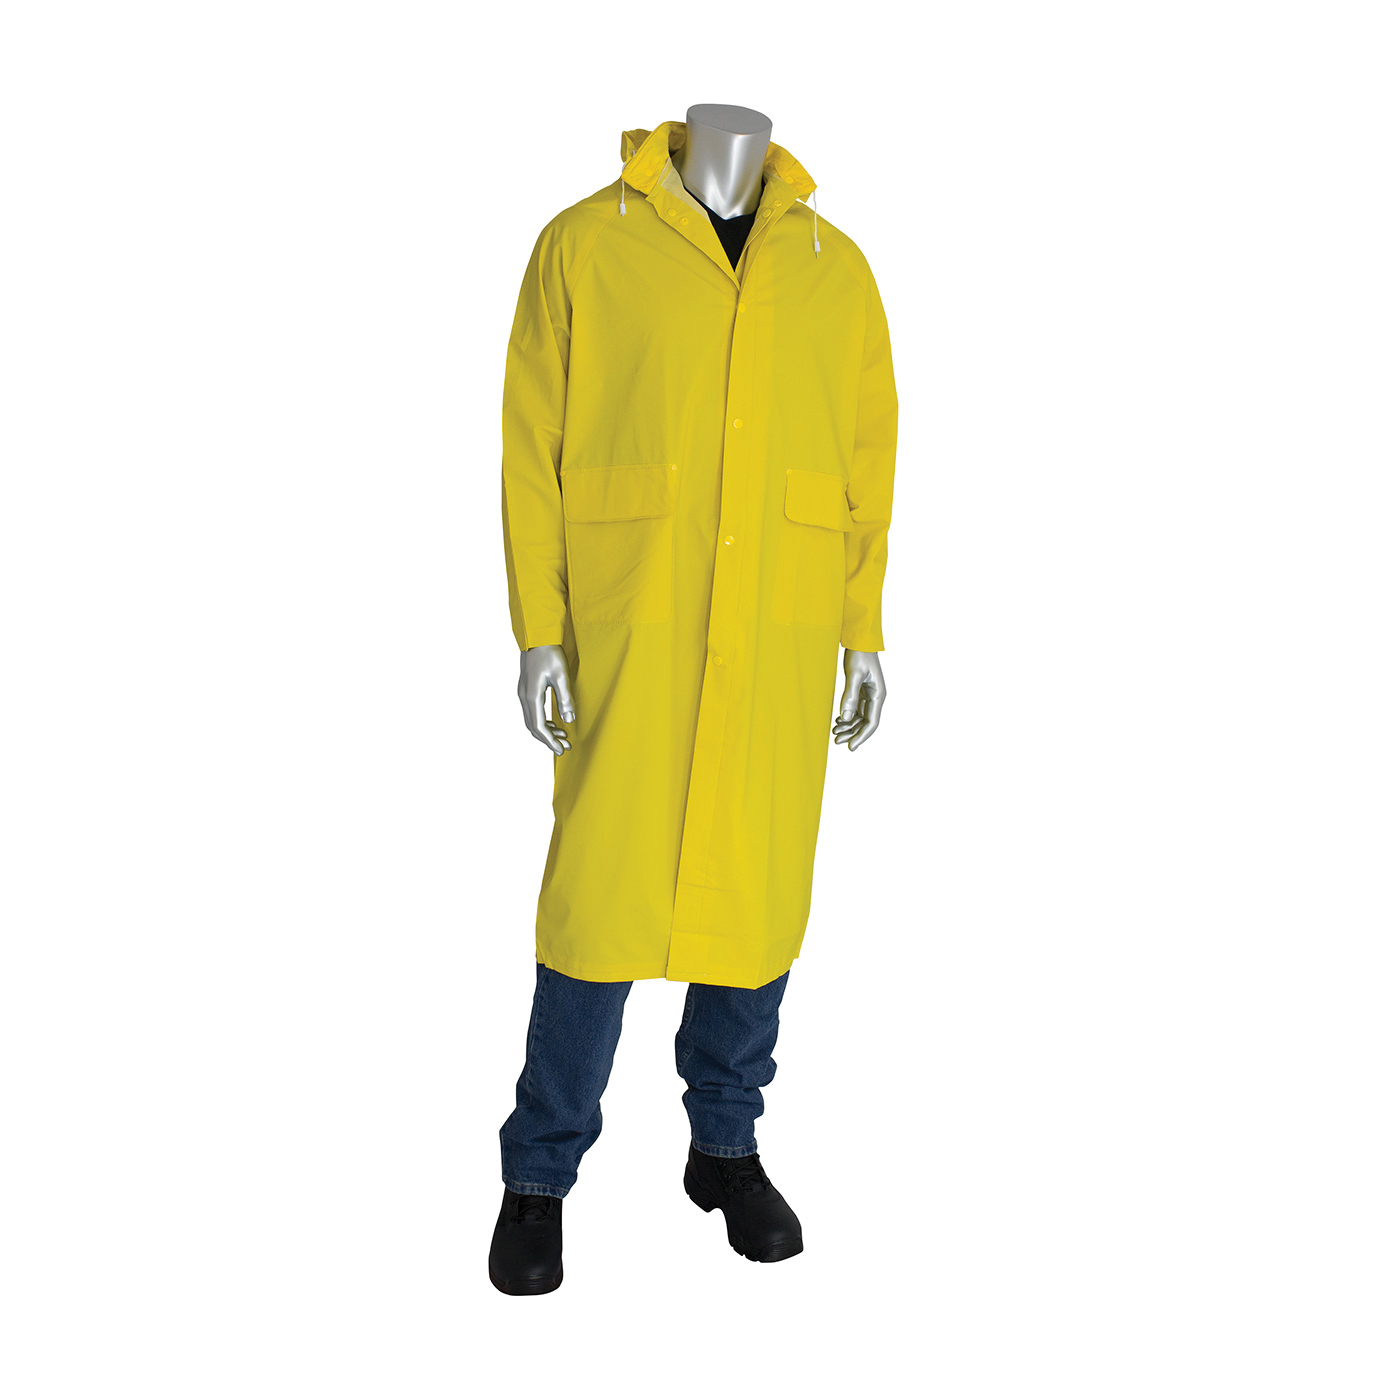 PIP® FALCON™ Base35FR™ 205-300FR/S 2-Piece Premium Rain Coat, Unisex, S, Yellow, Corduroy/Polyester/PVC, Resists: Flame and Water, Specifications Met: ASTM D6413